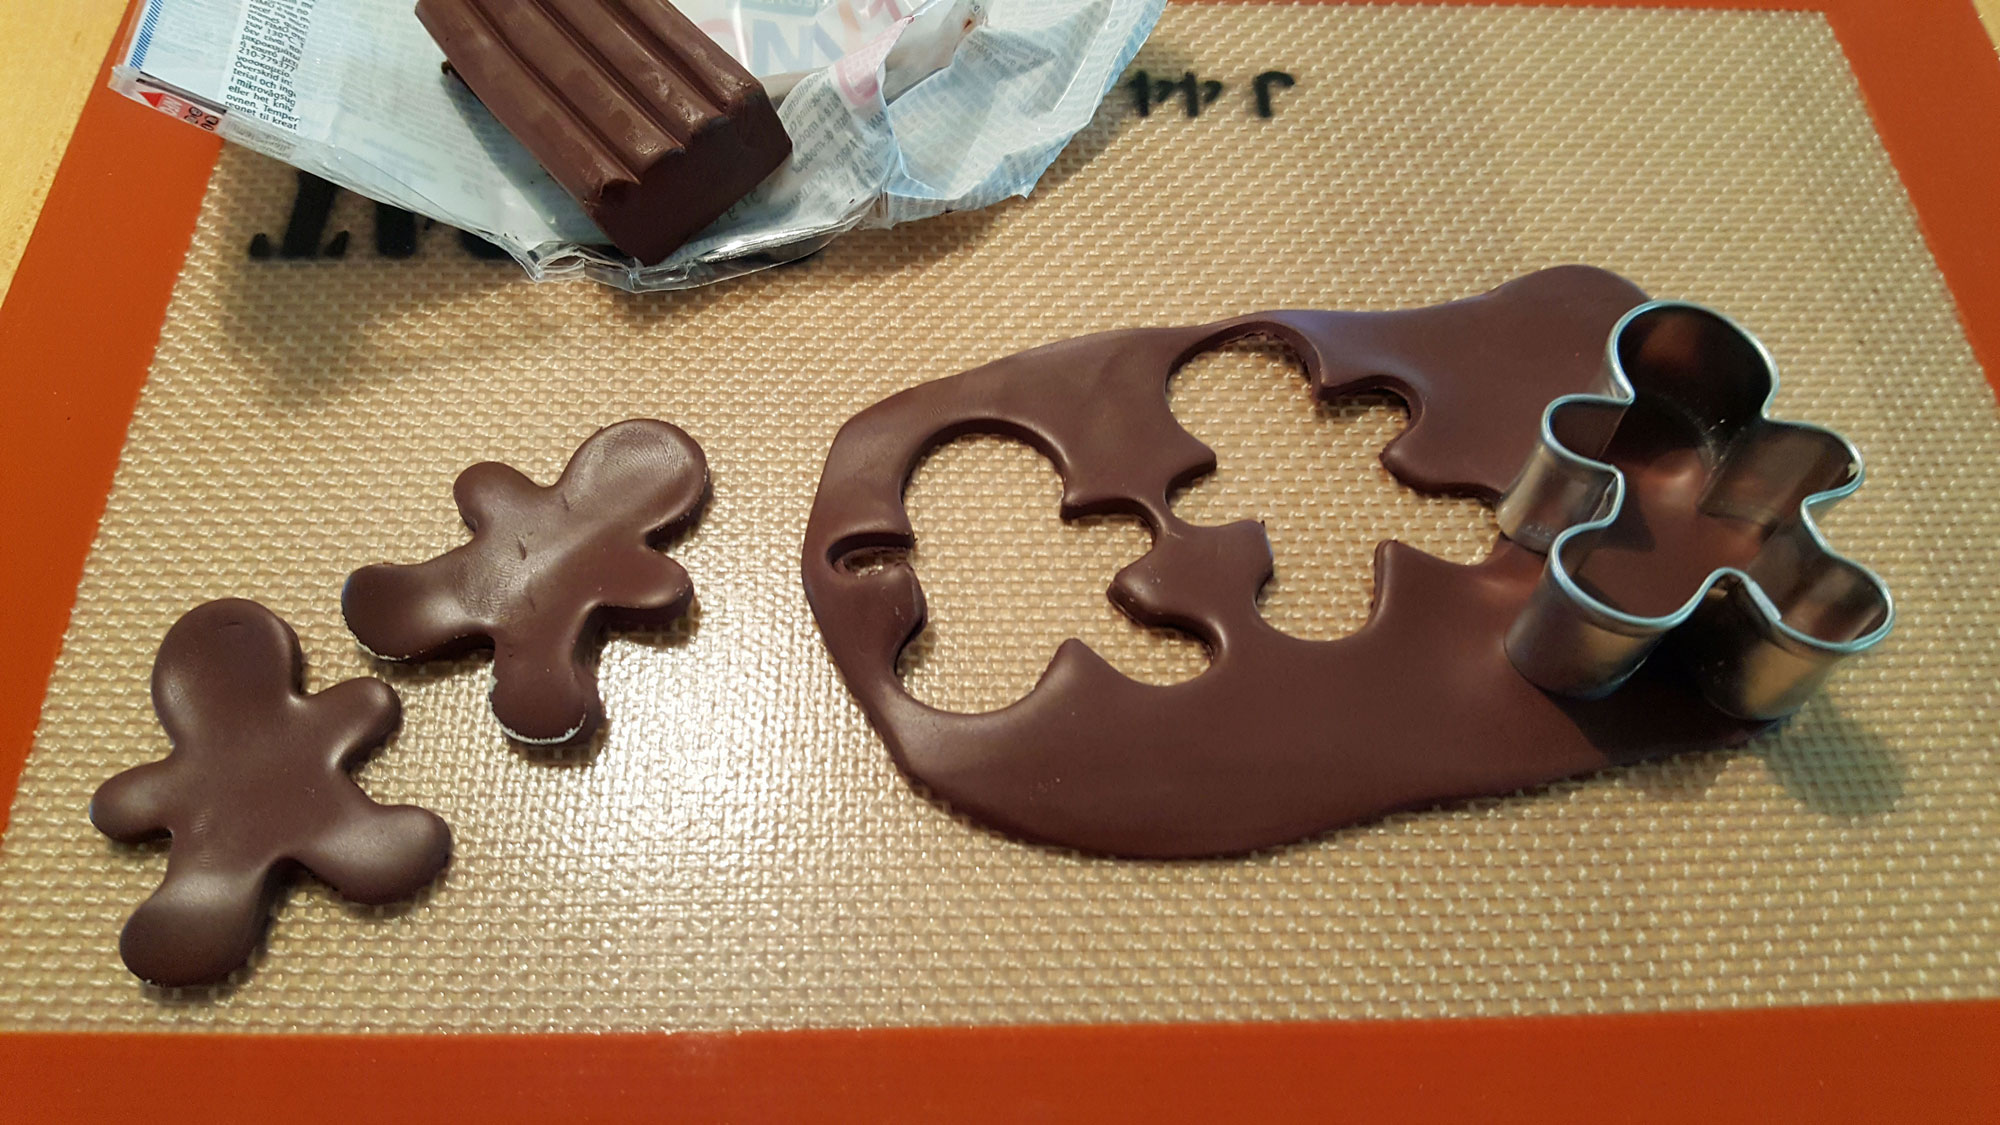 Step 2 is to use your gingerbread man cookie cutters to punch out your gingerbread people. Feel free to move the arms and legs into fun positions | OrnamentShop.com